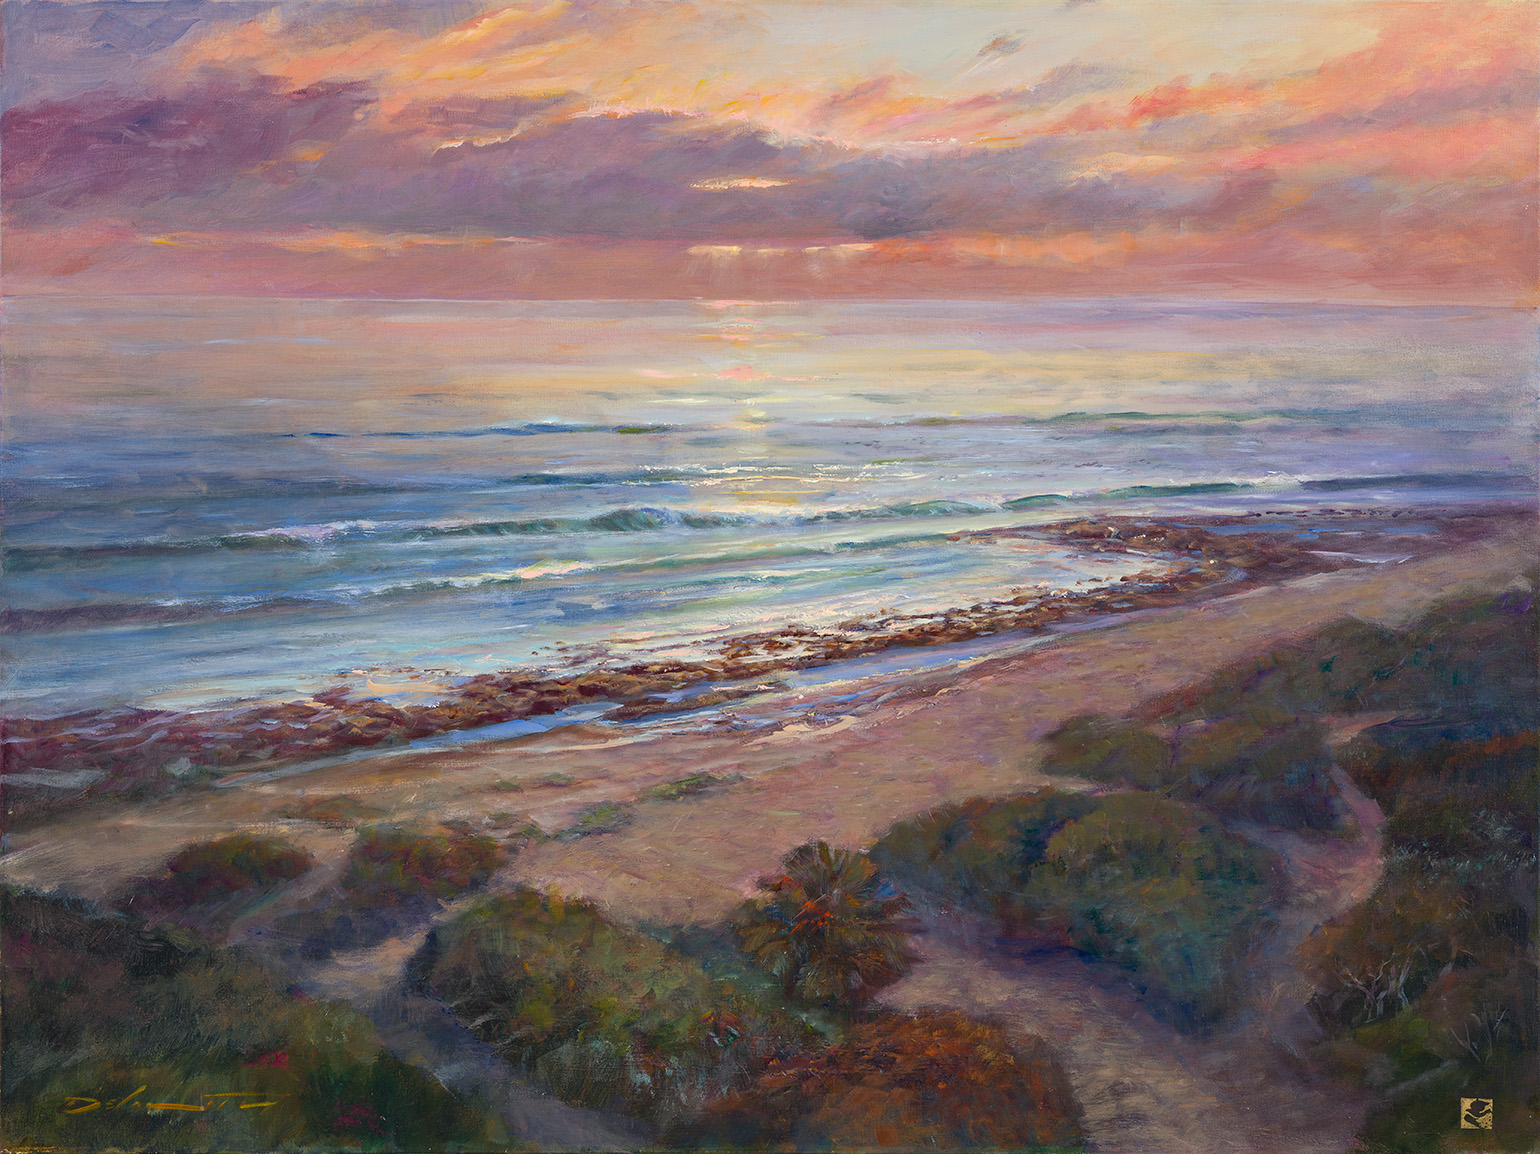 Rick Delanty, <em>From Afar, Trestles</em>, 2017, Oil over acrylic on panel, 30 x 40 in. UCI Jack and Shanaz Langson Institute and Museum of California Art, Gift from The Edward H. and Yvonne J. Boseker Collection © 2017, Rick J. Delanty, Delanty Fine Art